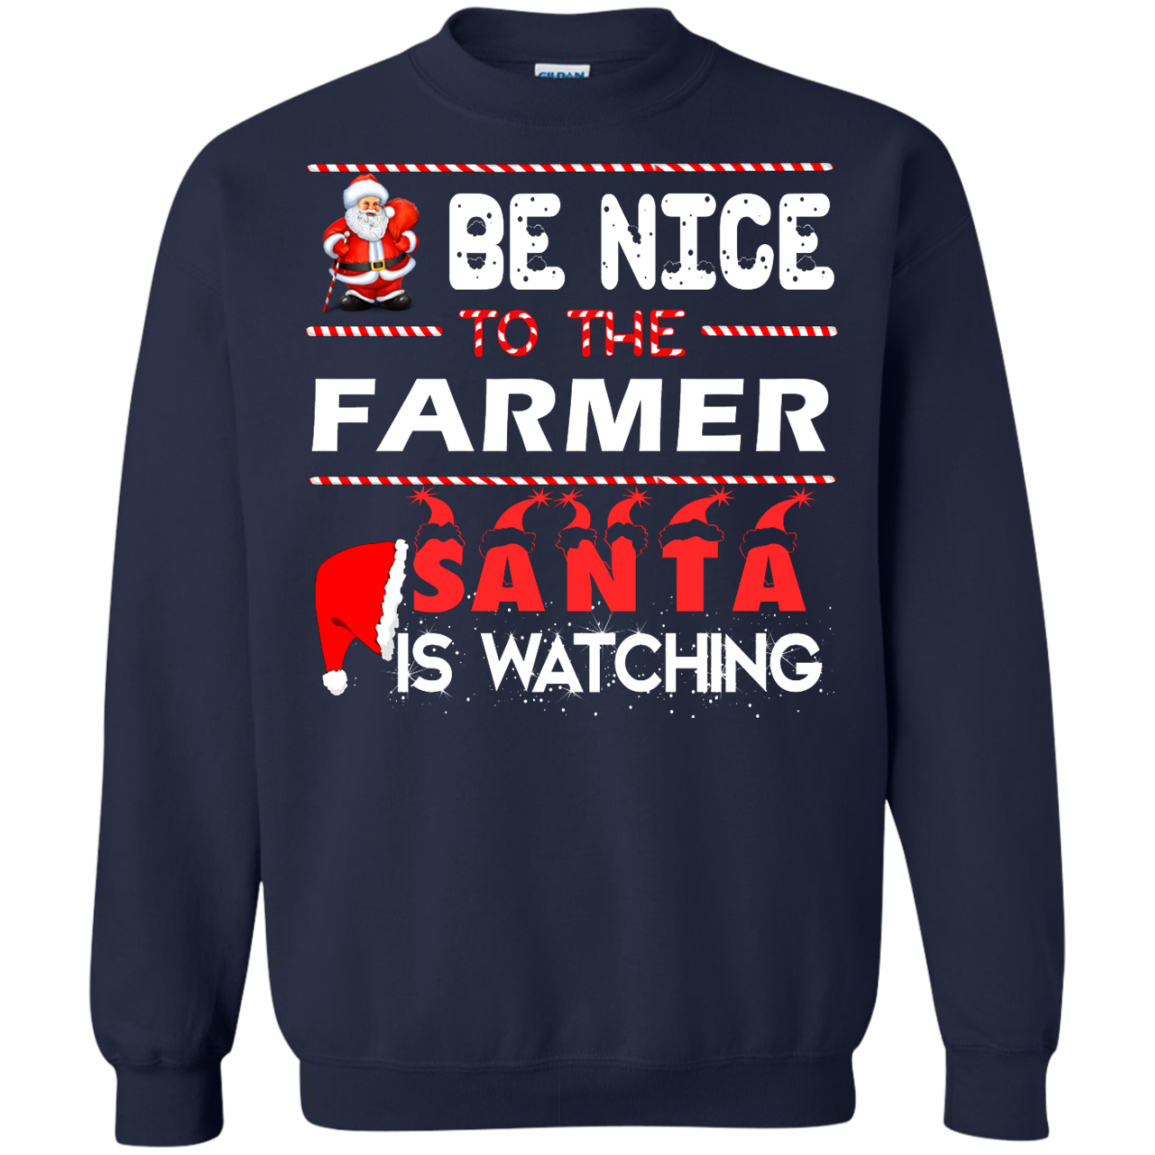 Be nice to the farmer Santa is watching sweater, shirt